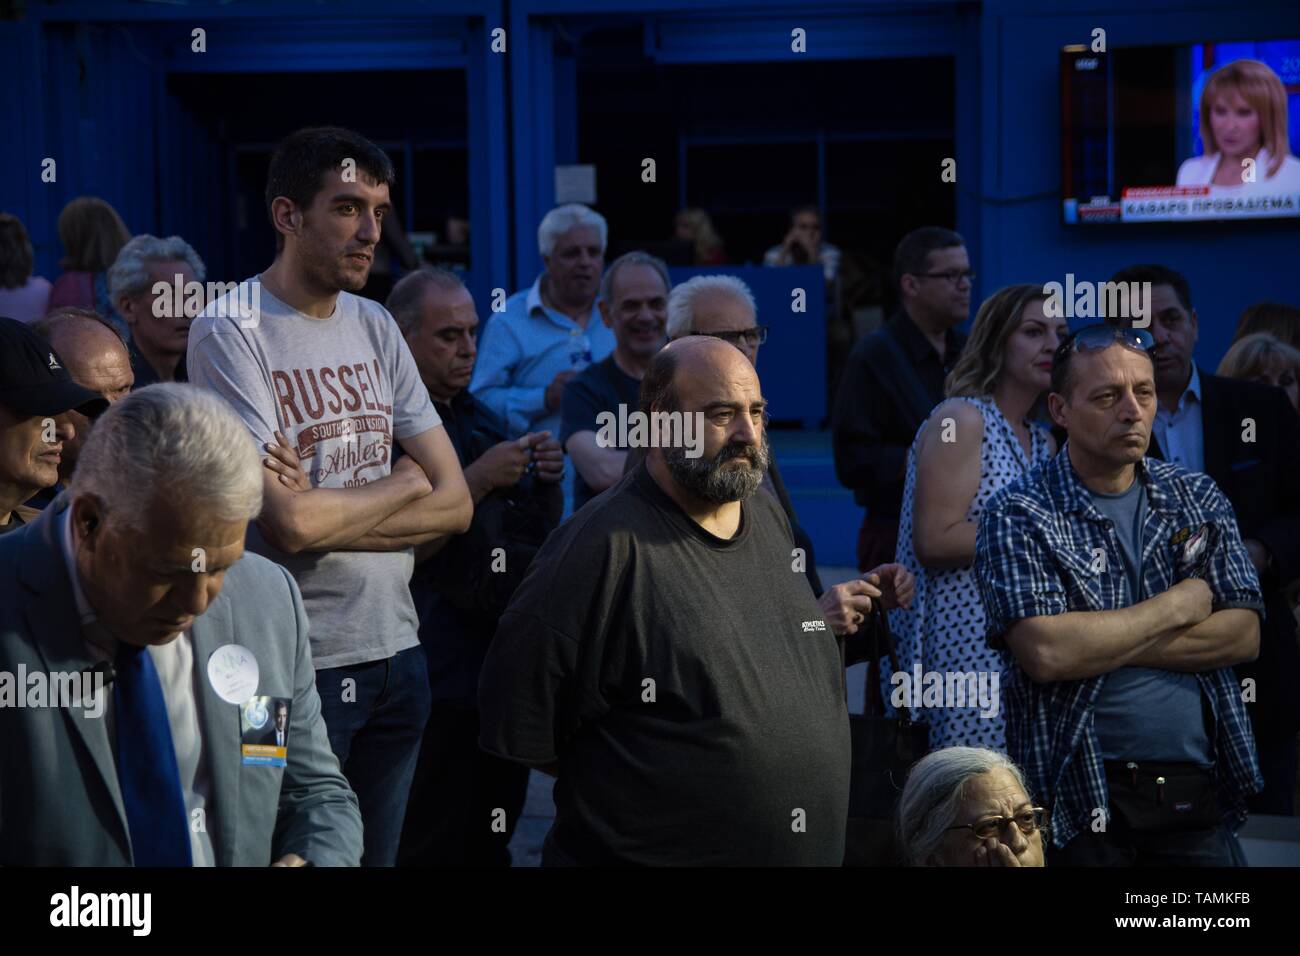 New Democracy party (ND) supporters seen at an electoral kiosk reacting during the first results of exit poll in the centre of Athens. Stock Photo